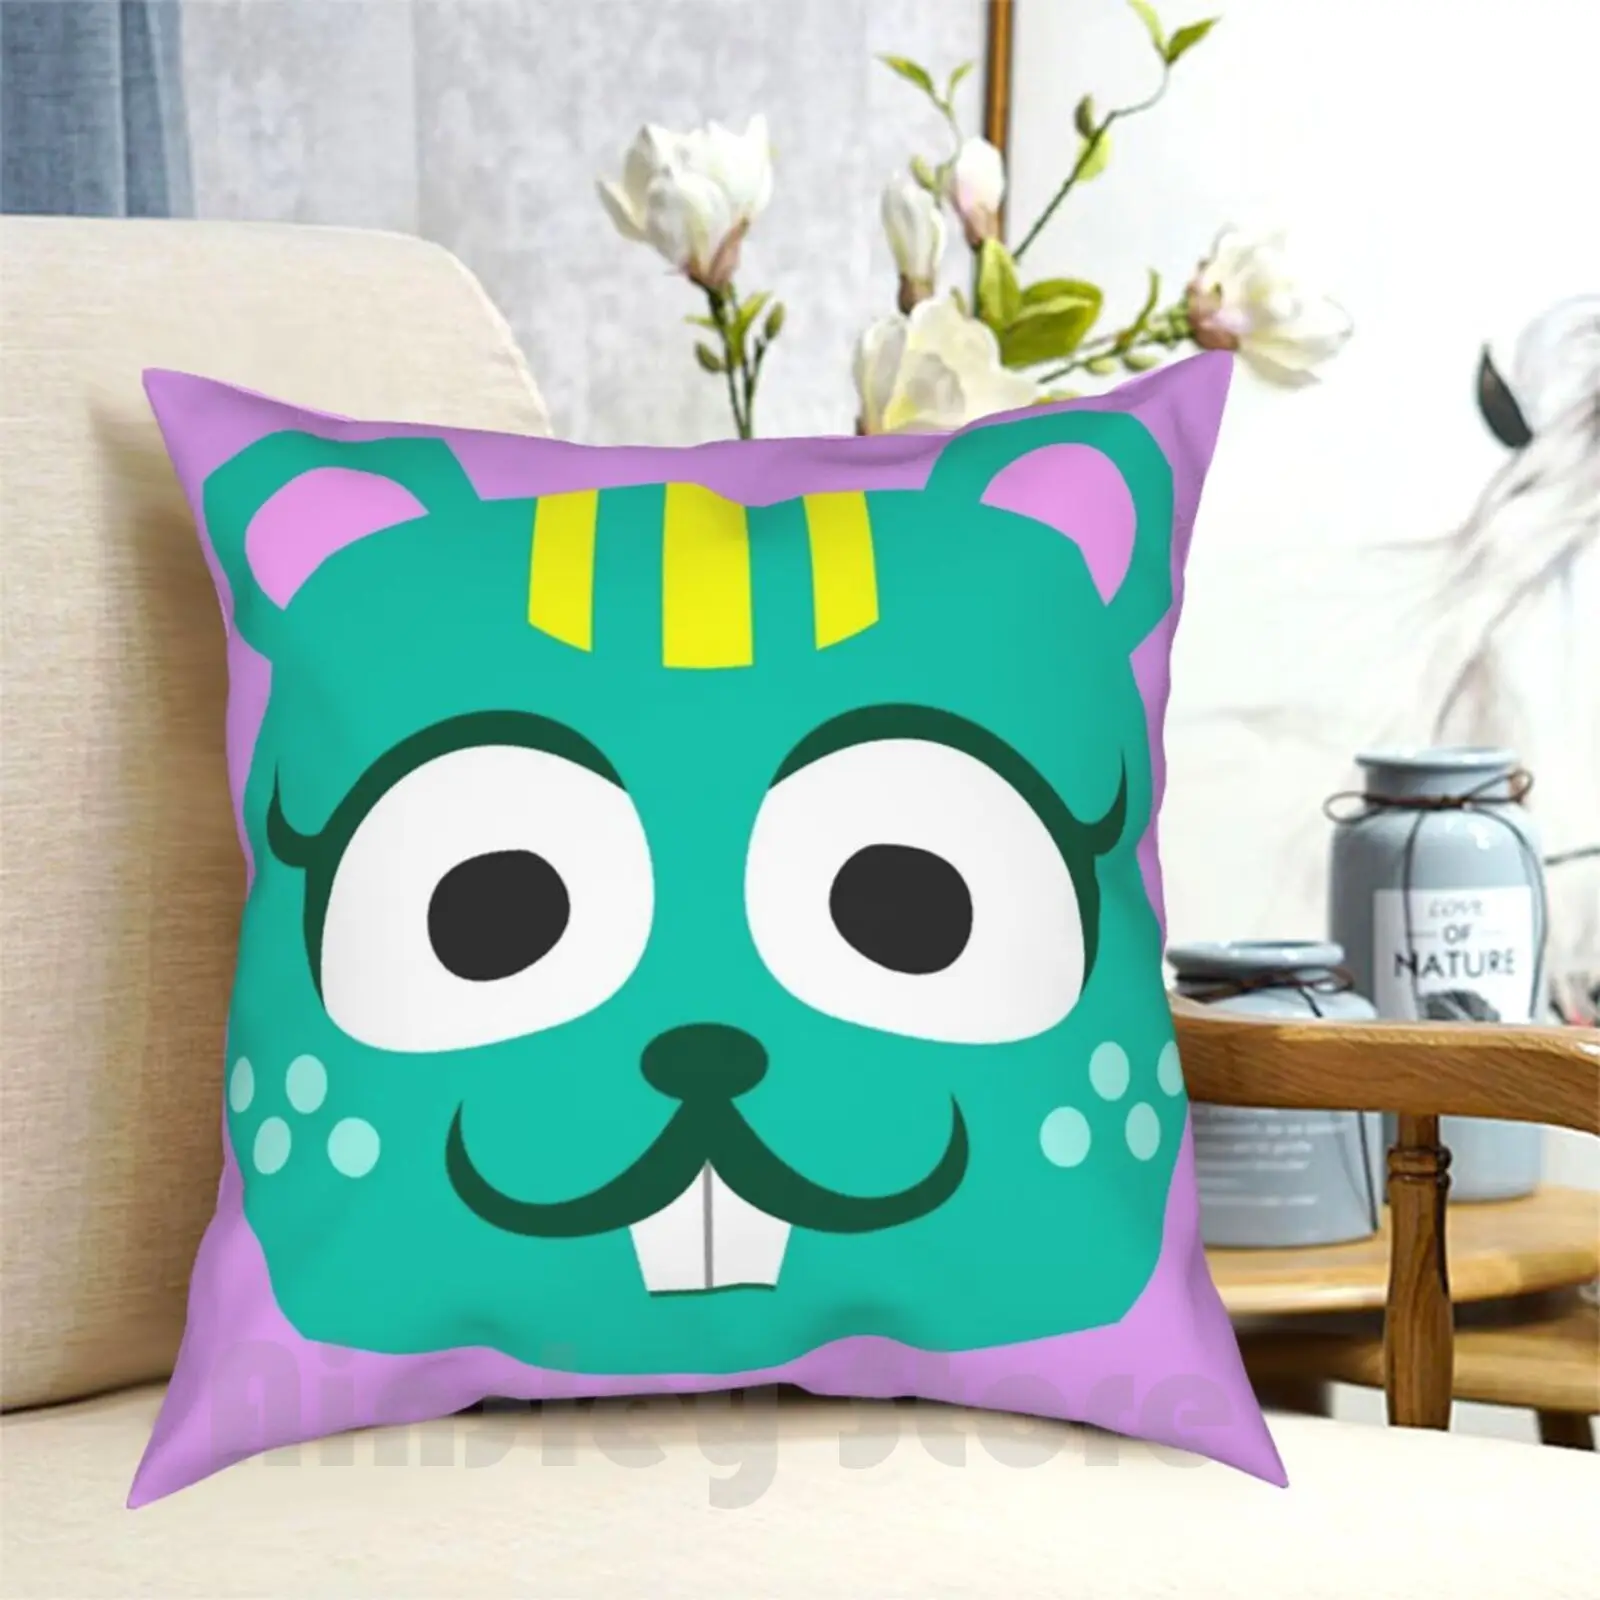 Nibbles Pillow Case Printed Home Soft DIY Pillow cover Squirrel Animal Gamecube Acnl Nintendo 3Ds Gameboy Animals Cute